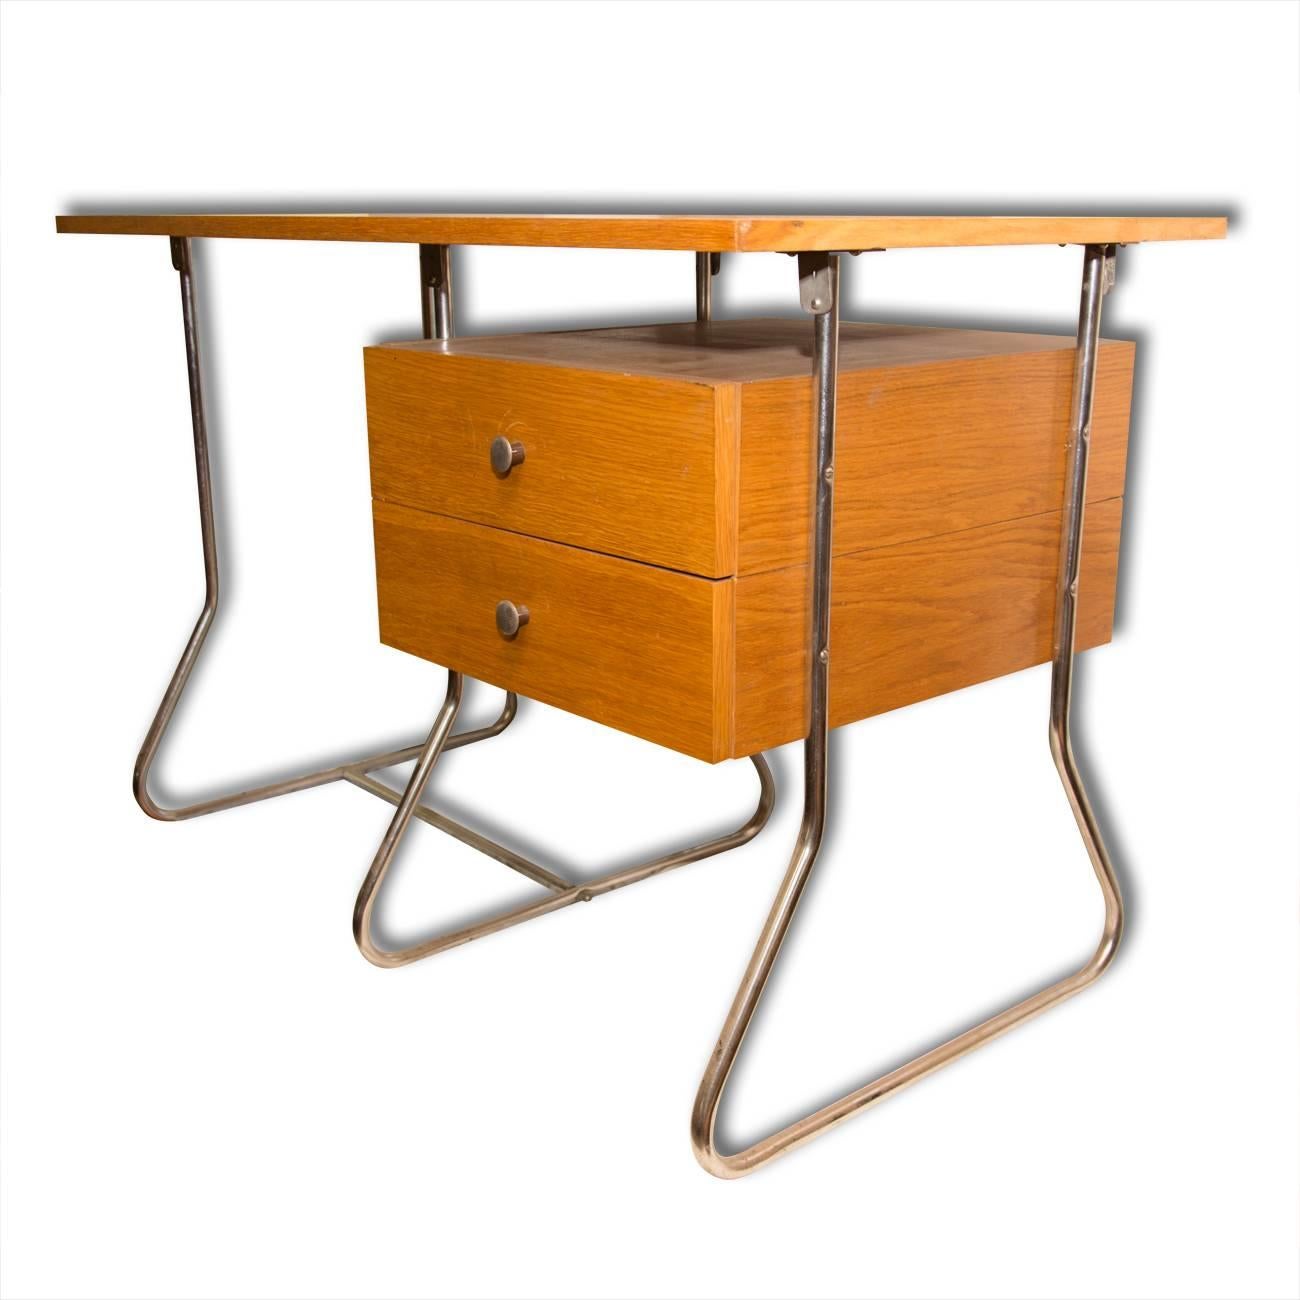 This writing desk was manufactured in the 1950s in post-war Czechoslovakia and produced by Kovona - a company producing metal and chrome-plated furniture. It features a simple design, made of bent chrome-plated steel and veneered plywood. In